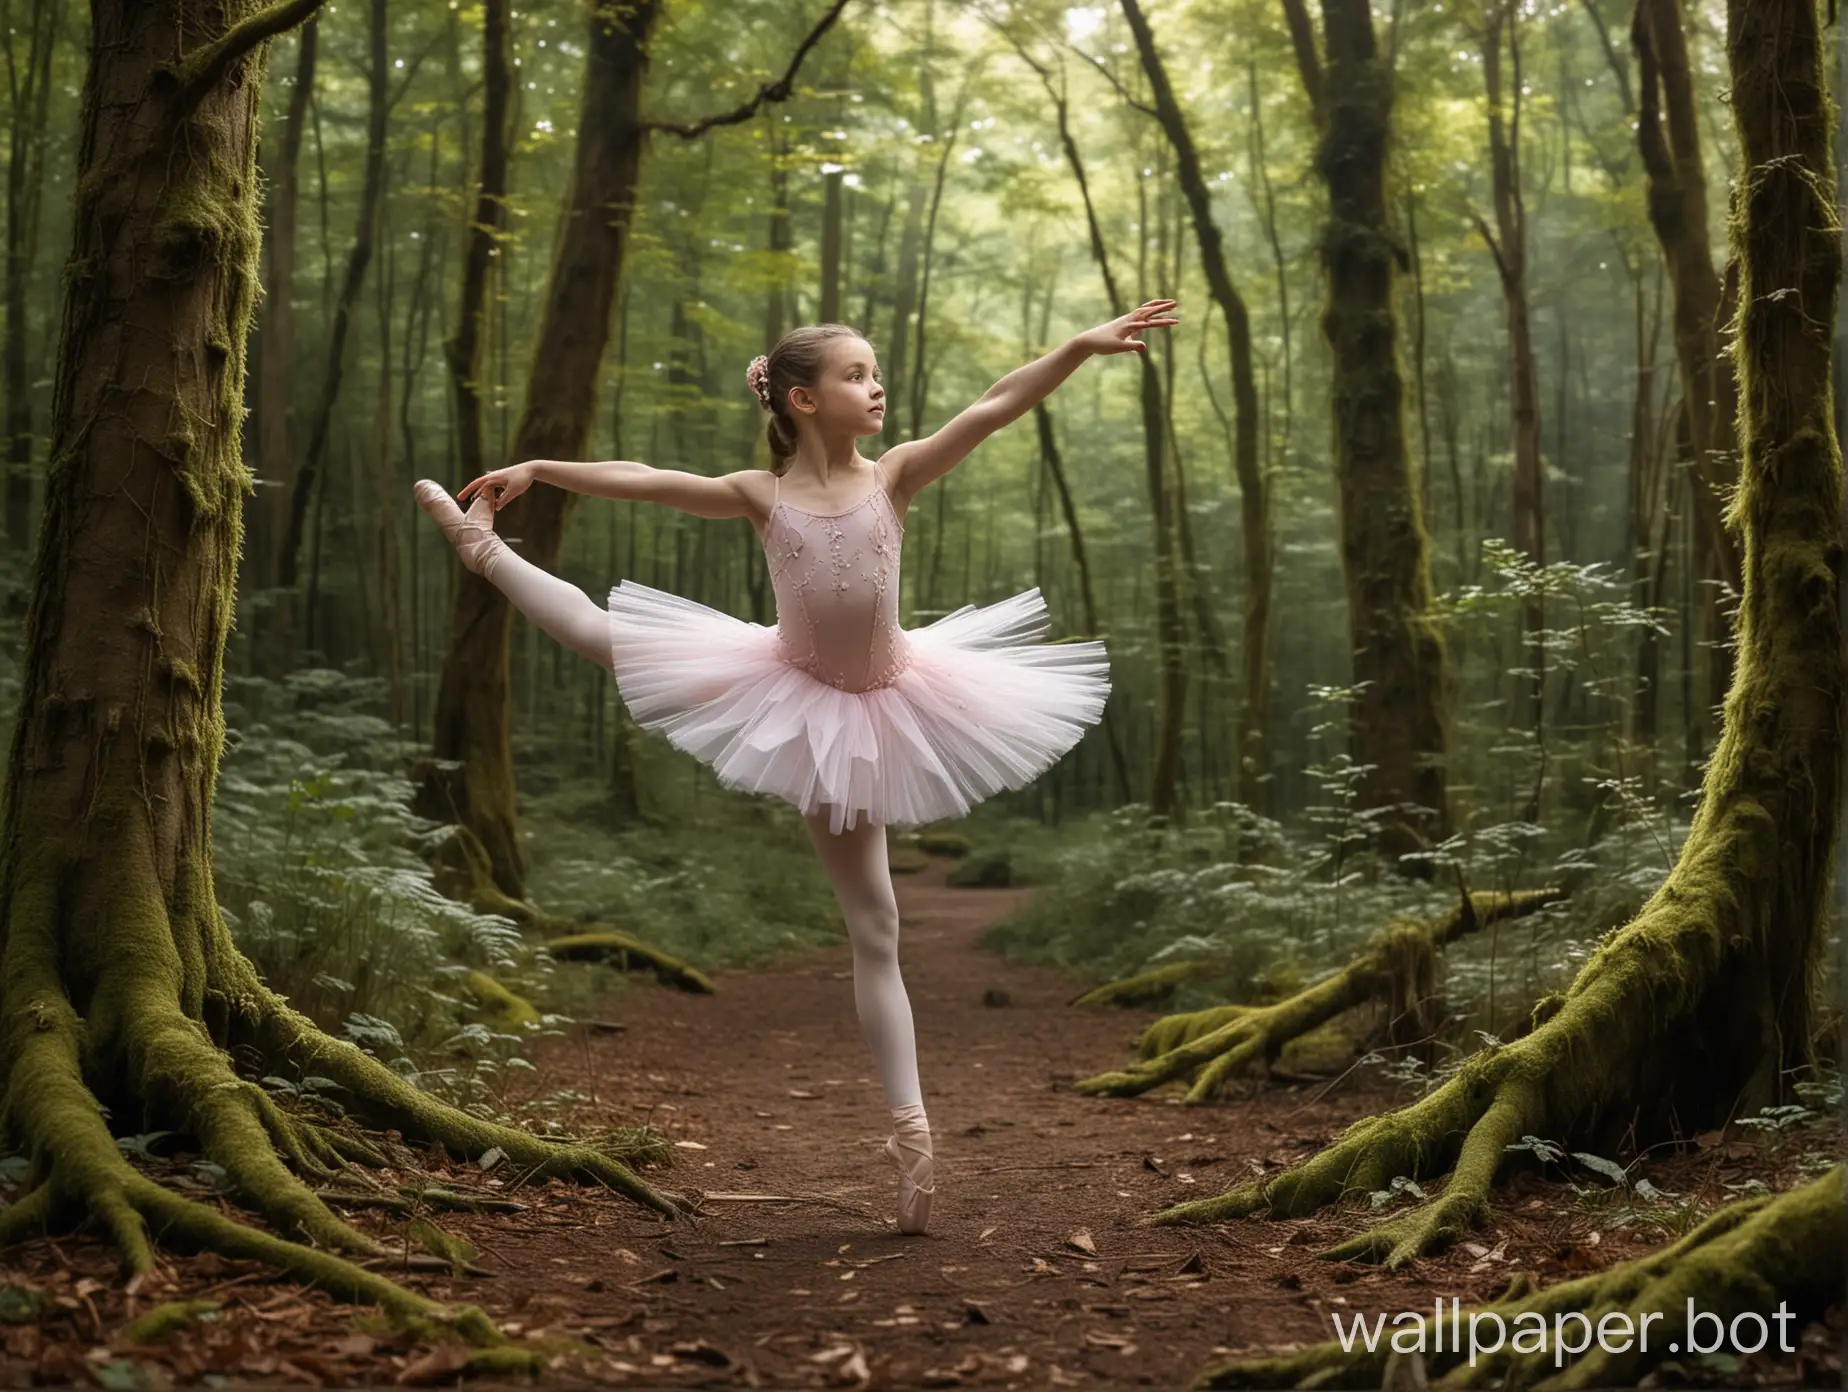 Young-Ballerina-Dancing-Among-Mythical-Creatures-in-Enchanted-Forest